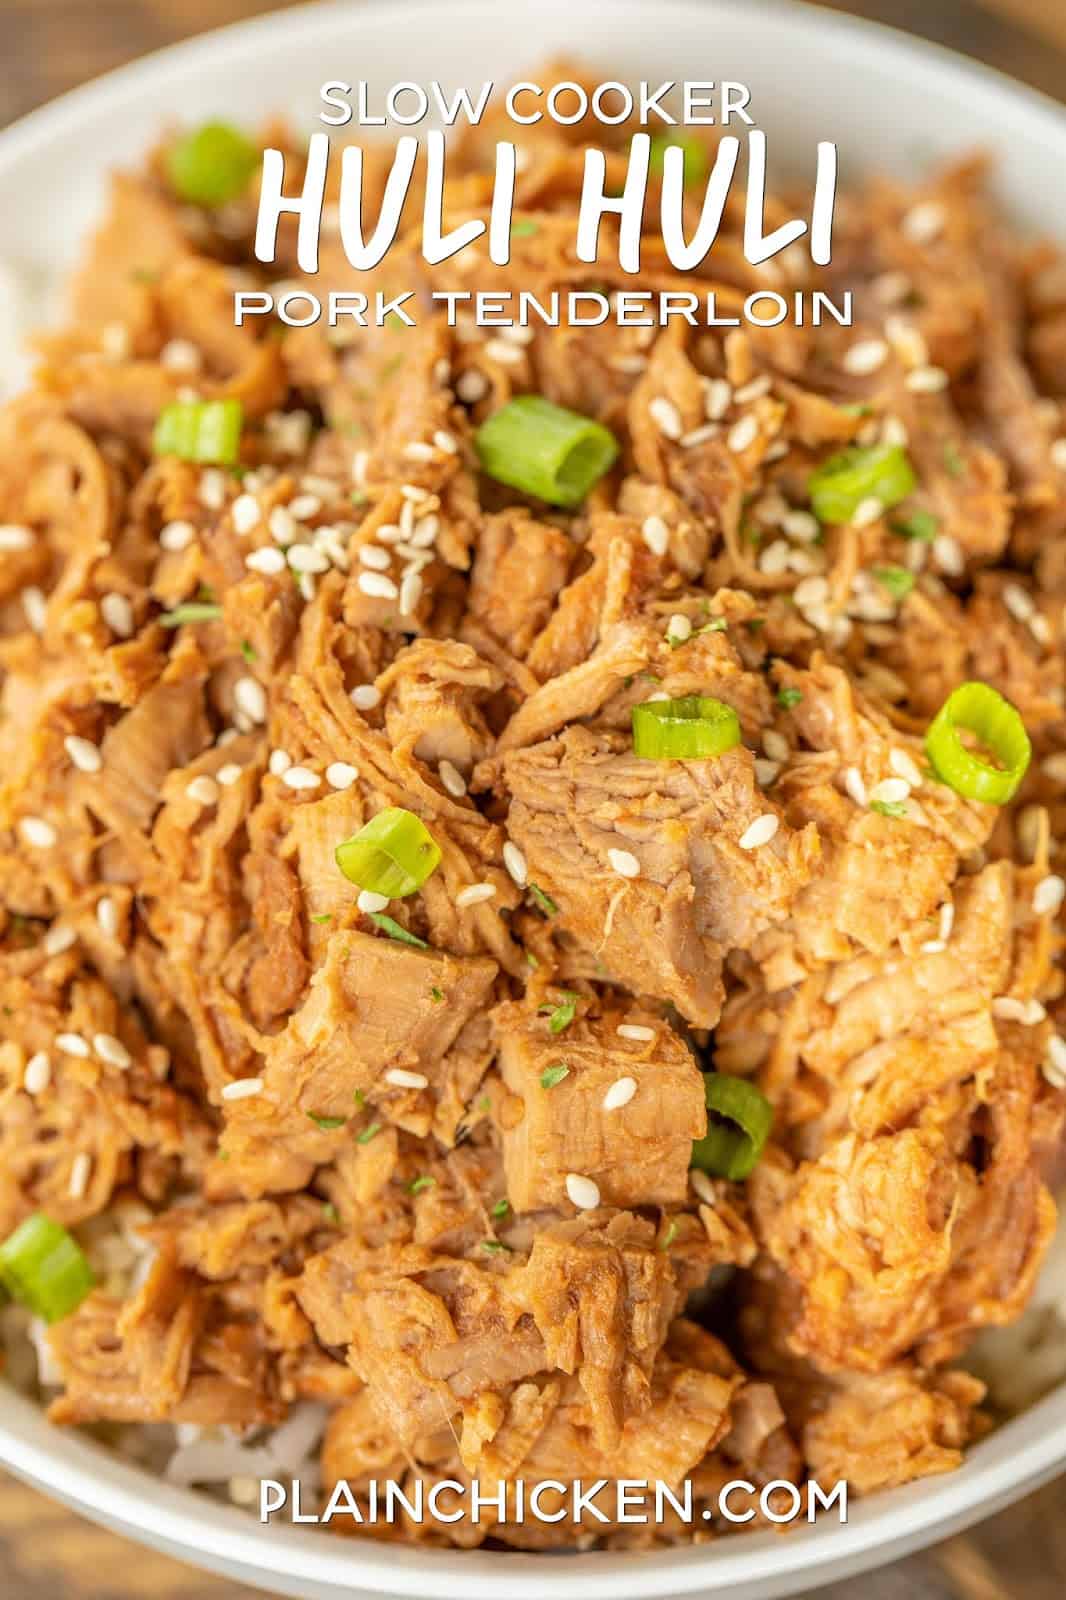 Slow Cooker Huli Huli Pork Tenderloin - DANGEROUSLY good!!! Pork tenderloin slow cooked in brown sugar, soy sauce, ketchup, sherry, ginger, and garlic. We ate this twice in one week. It was seriously delicious!! Serve over rice, potatoes or noodles. Also great on top of a salad or nachos! #slowcooker #pork #dinner